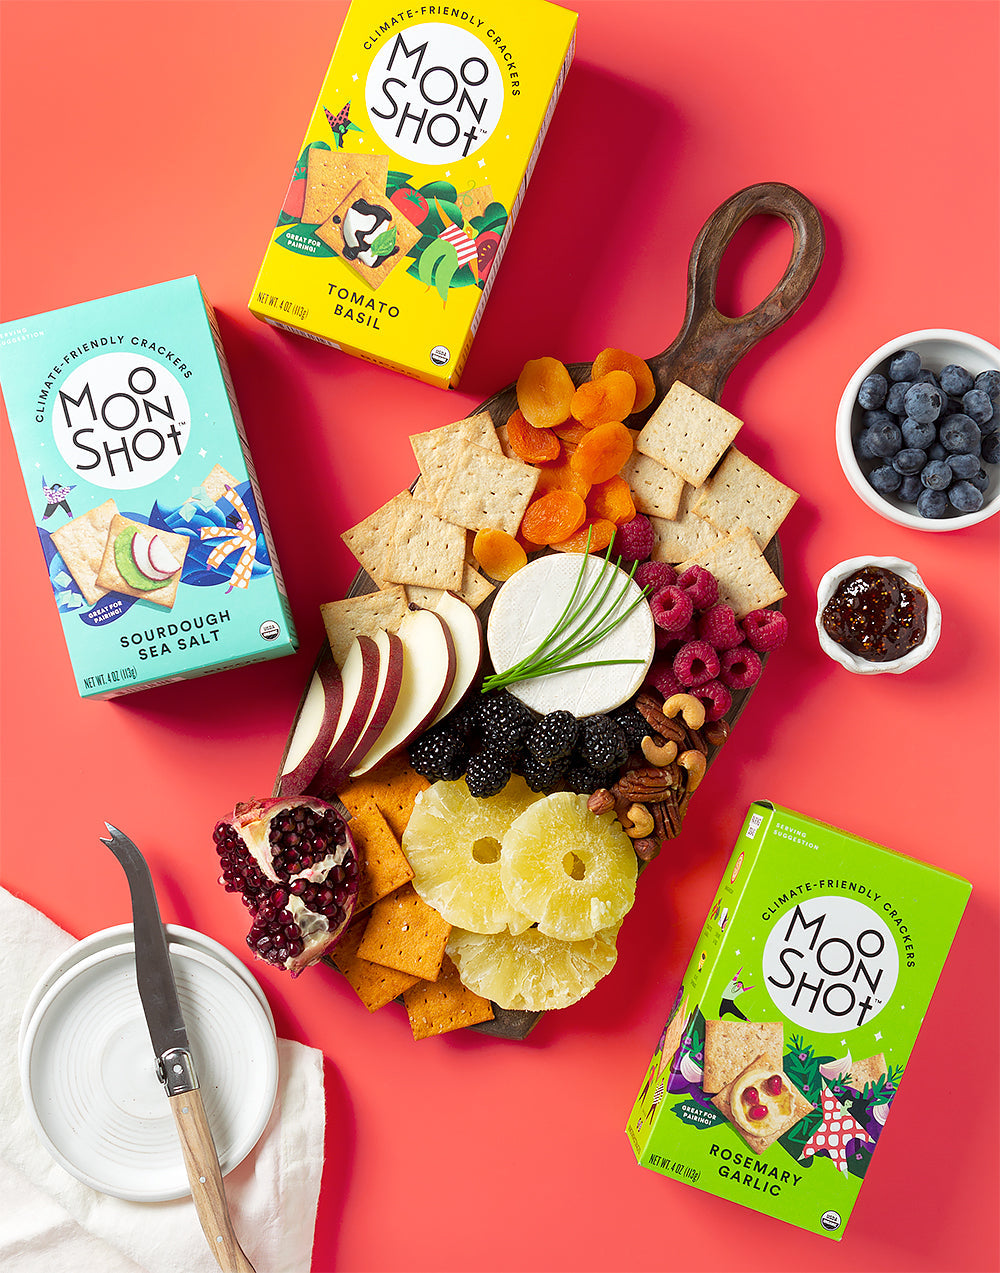 Variety Pack by Moonshot Snacks